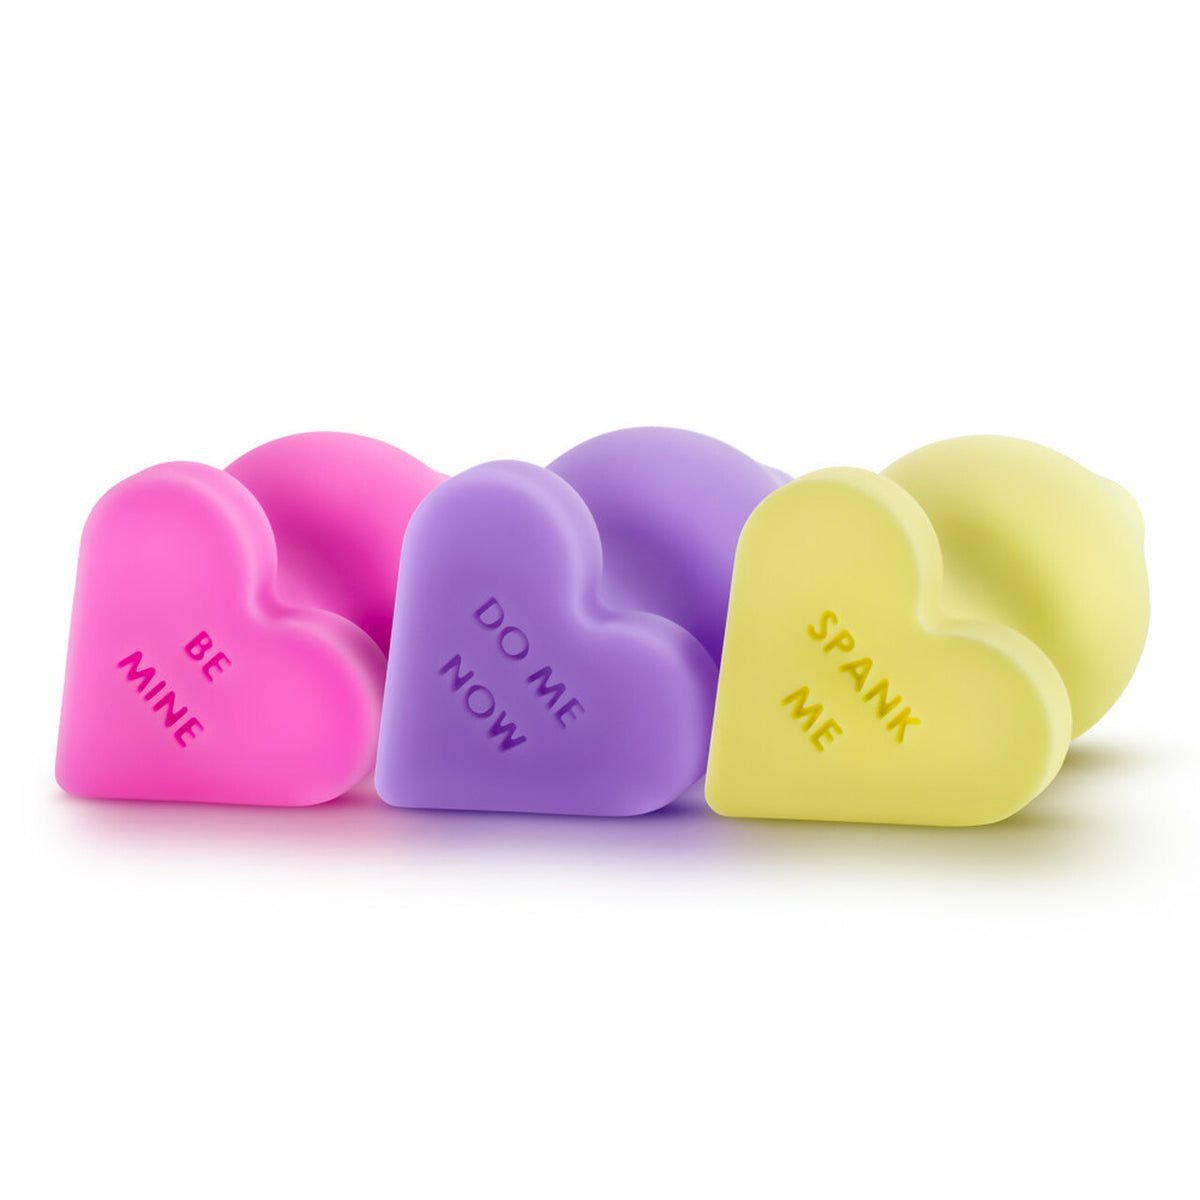 Blush Play with Me Naughty Candy Heart Plug – Temple of Love LLC